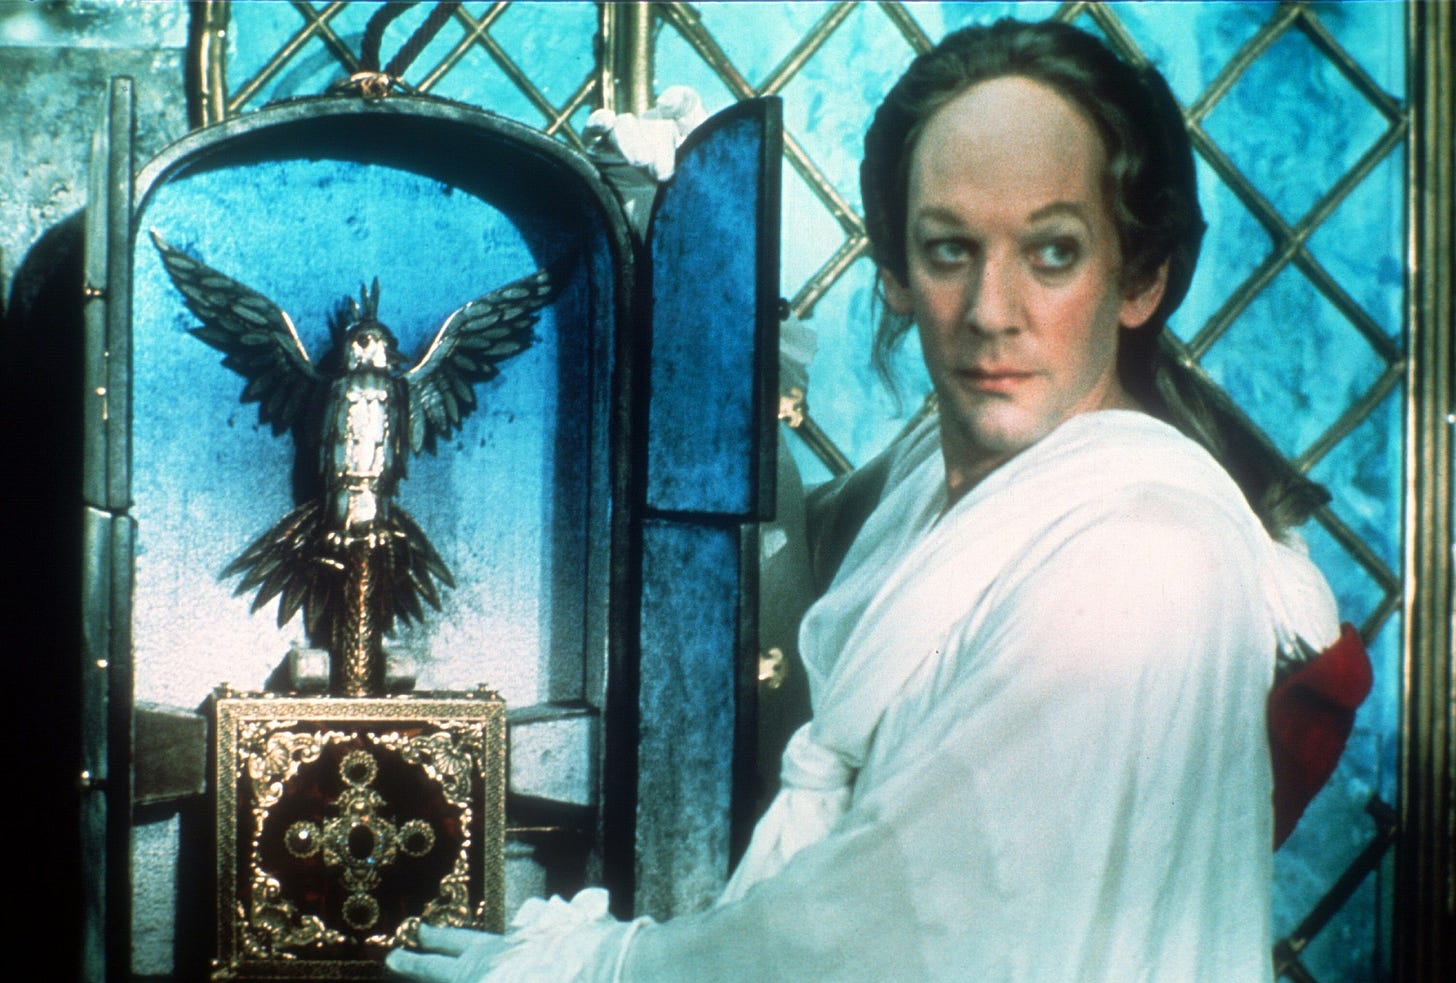 Still from Fellini’s Casanova (1976). Donald Sutherland as Casanova stands beside a religious icon or relic in the shape of an eagle. 